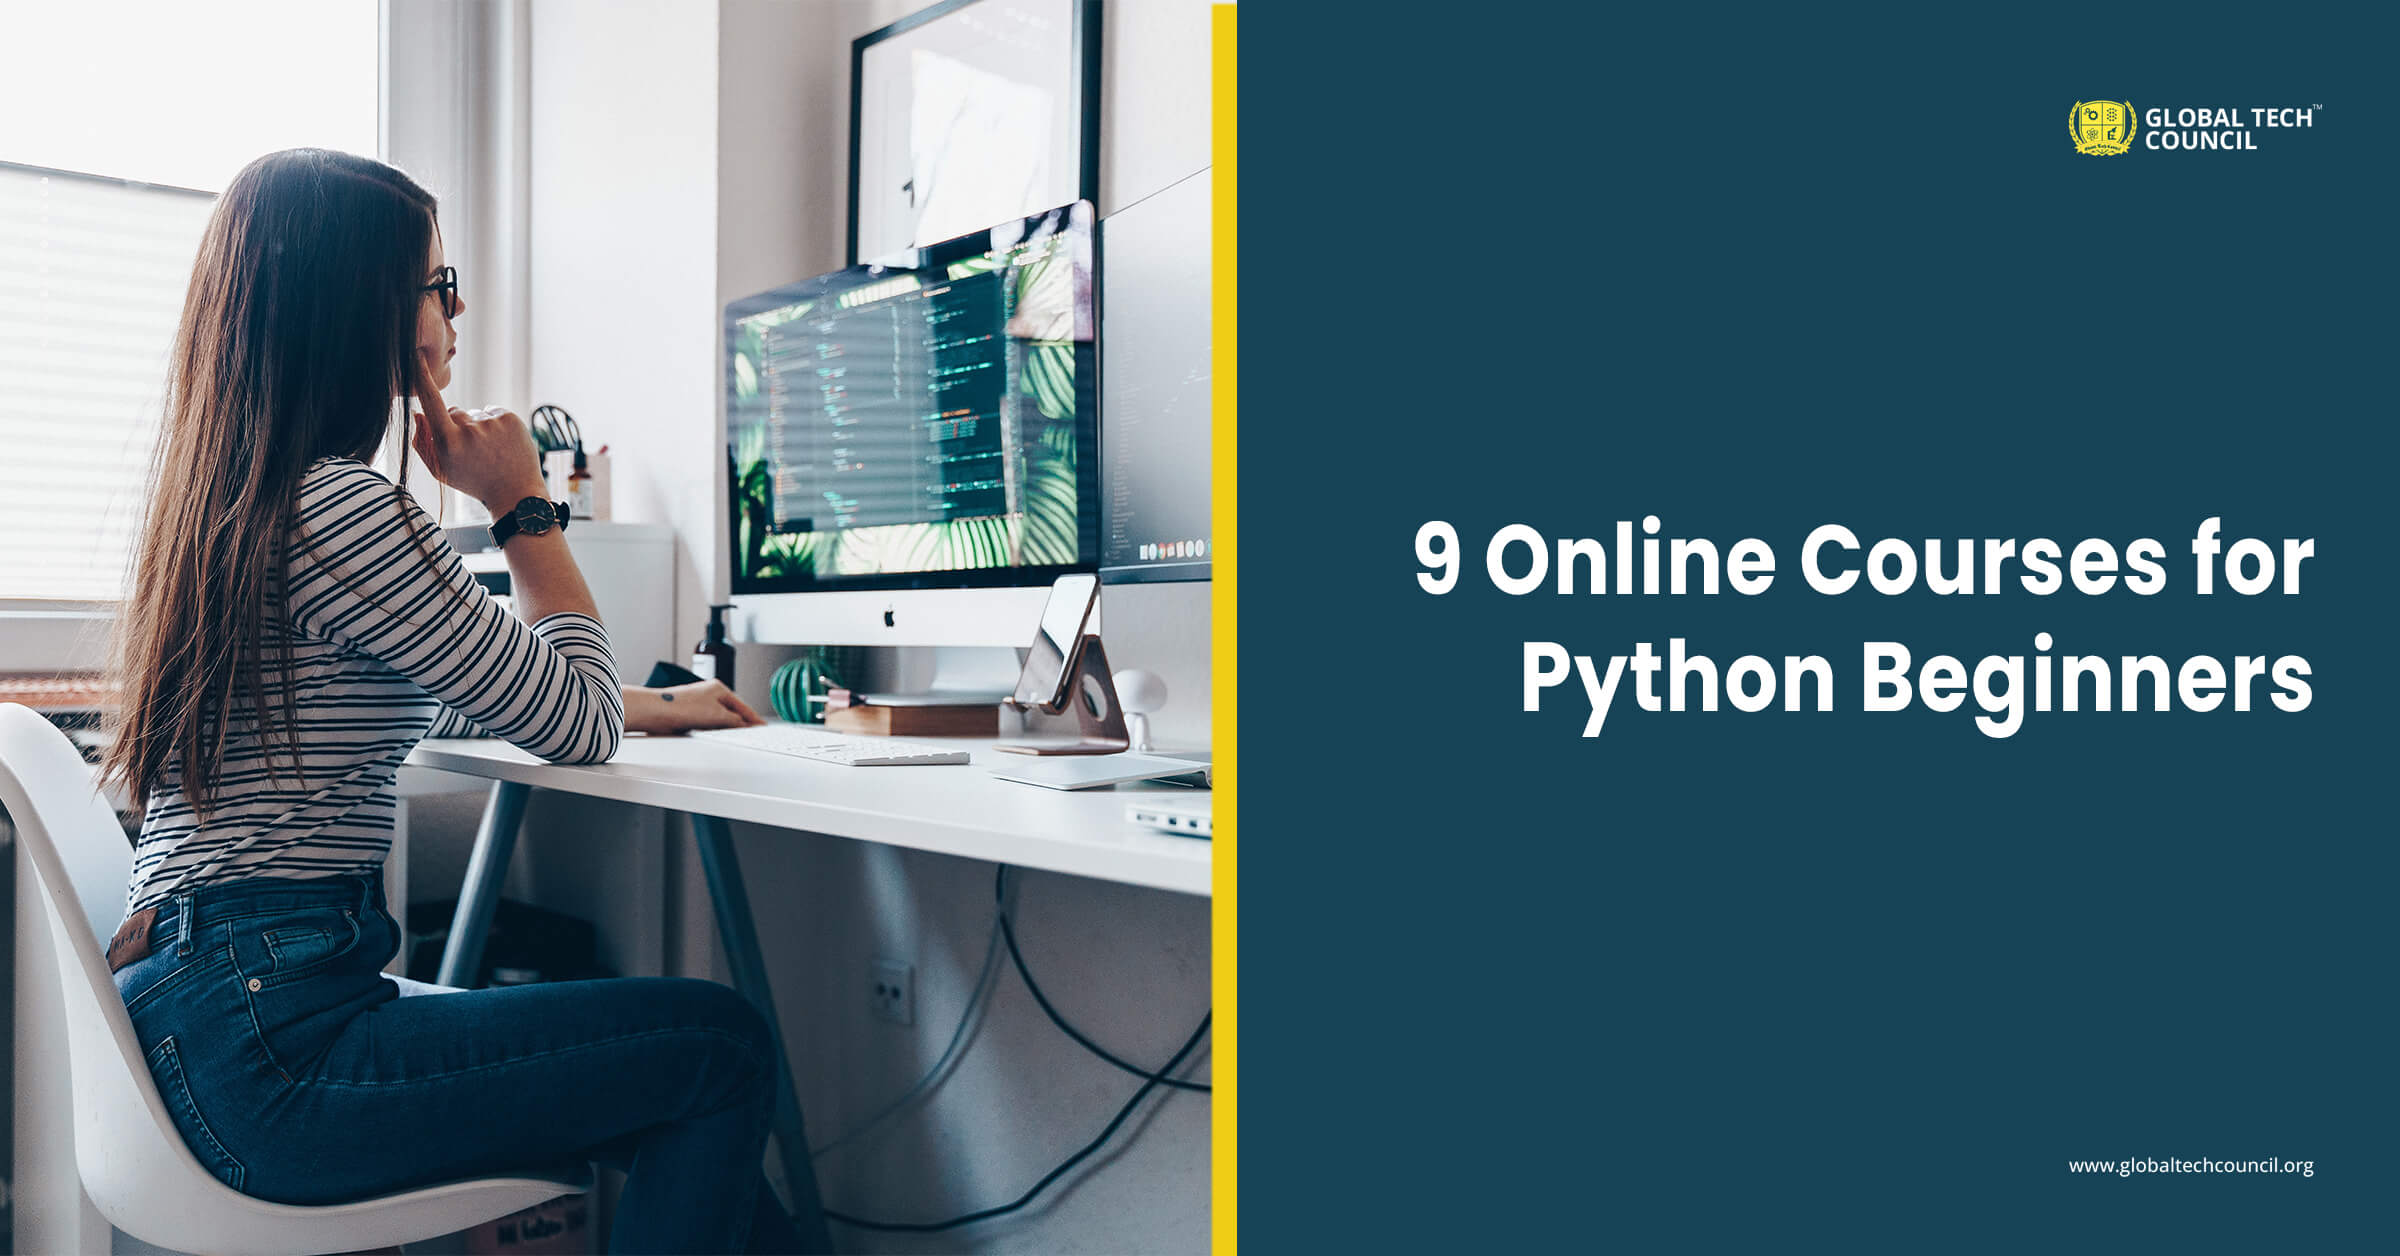 9 Online Courses for Python Beginners